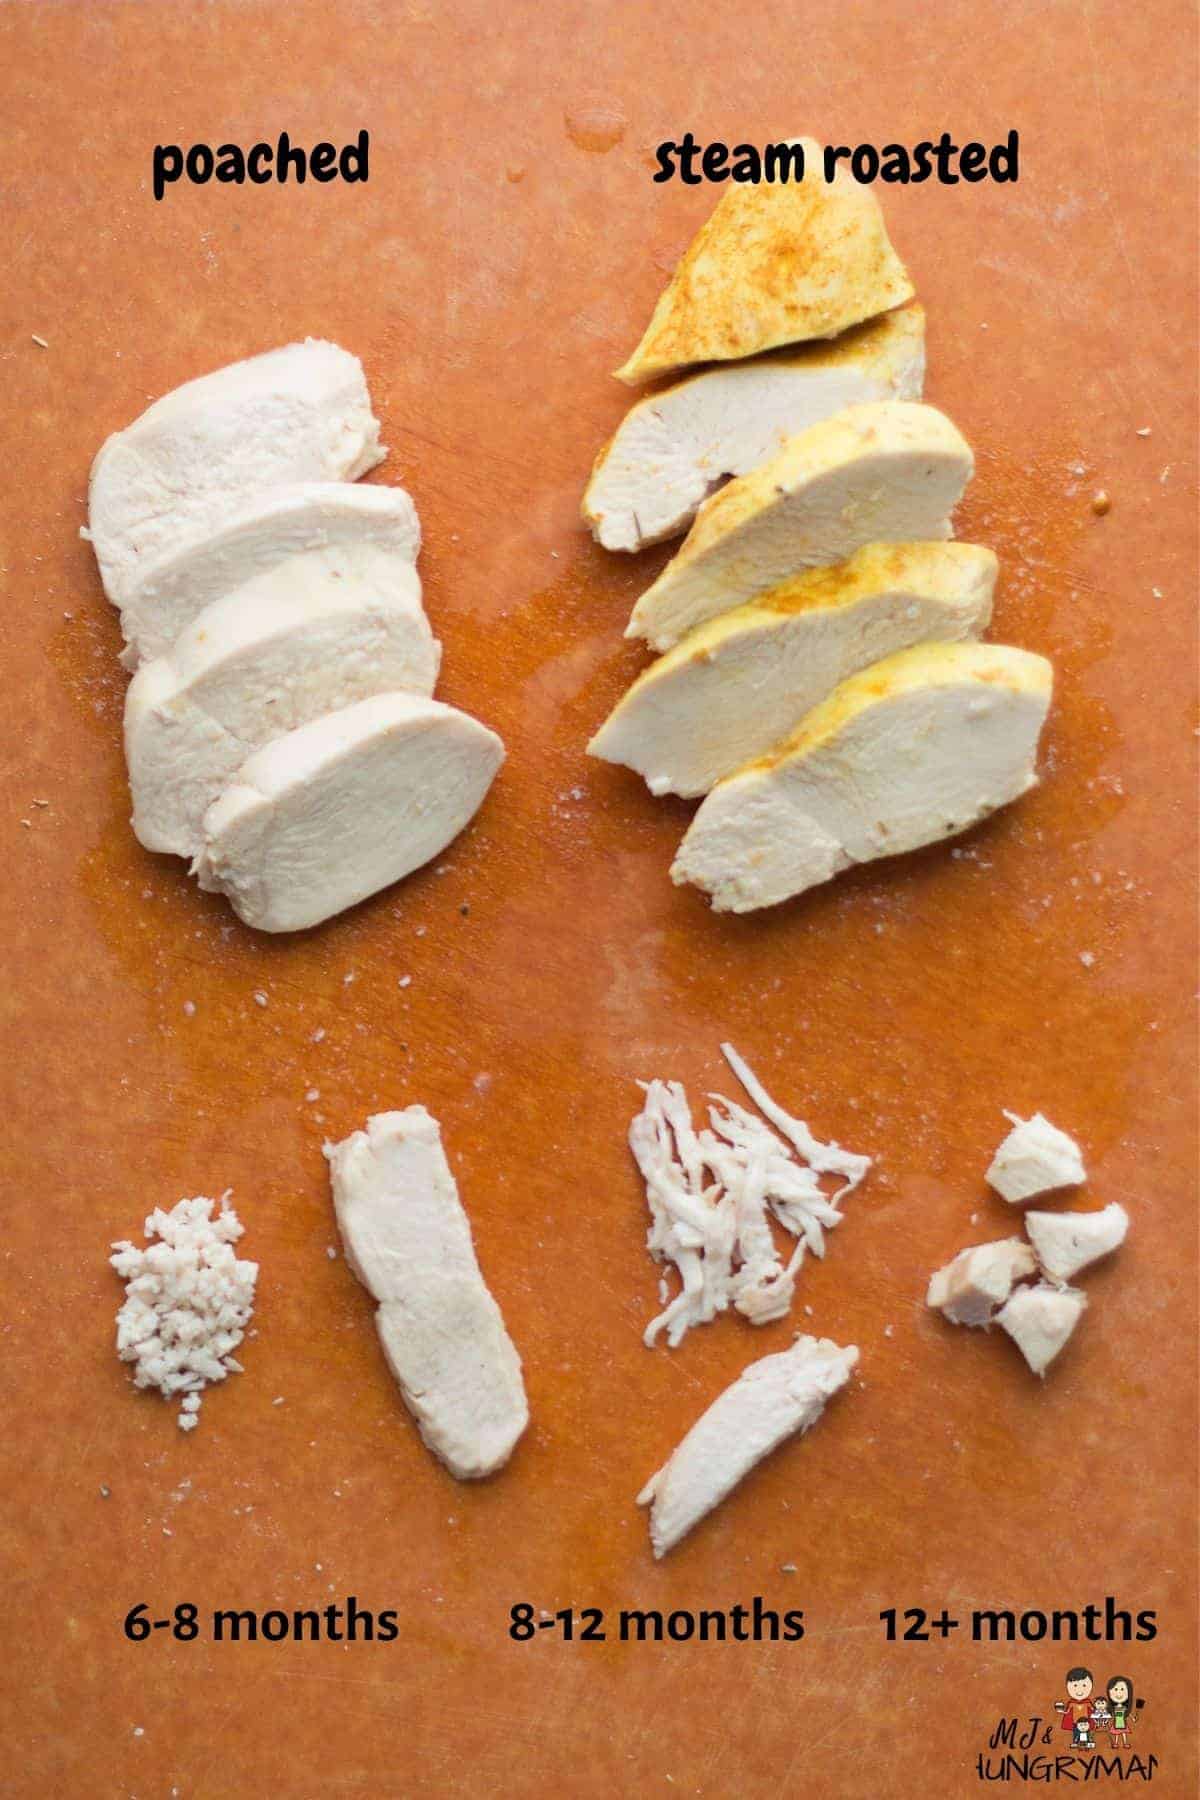 thick slices of poached and steam roasted chicken placed on the top of wooden cutting board and on the bottom are all the different ways to serve chicken to babies depending on baby's age.